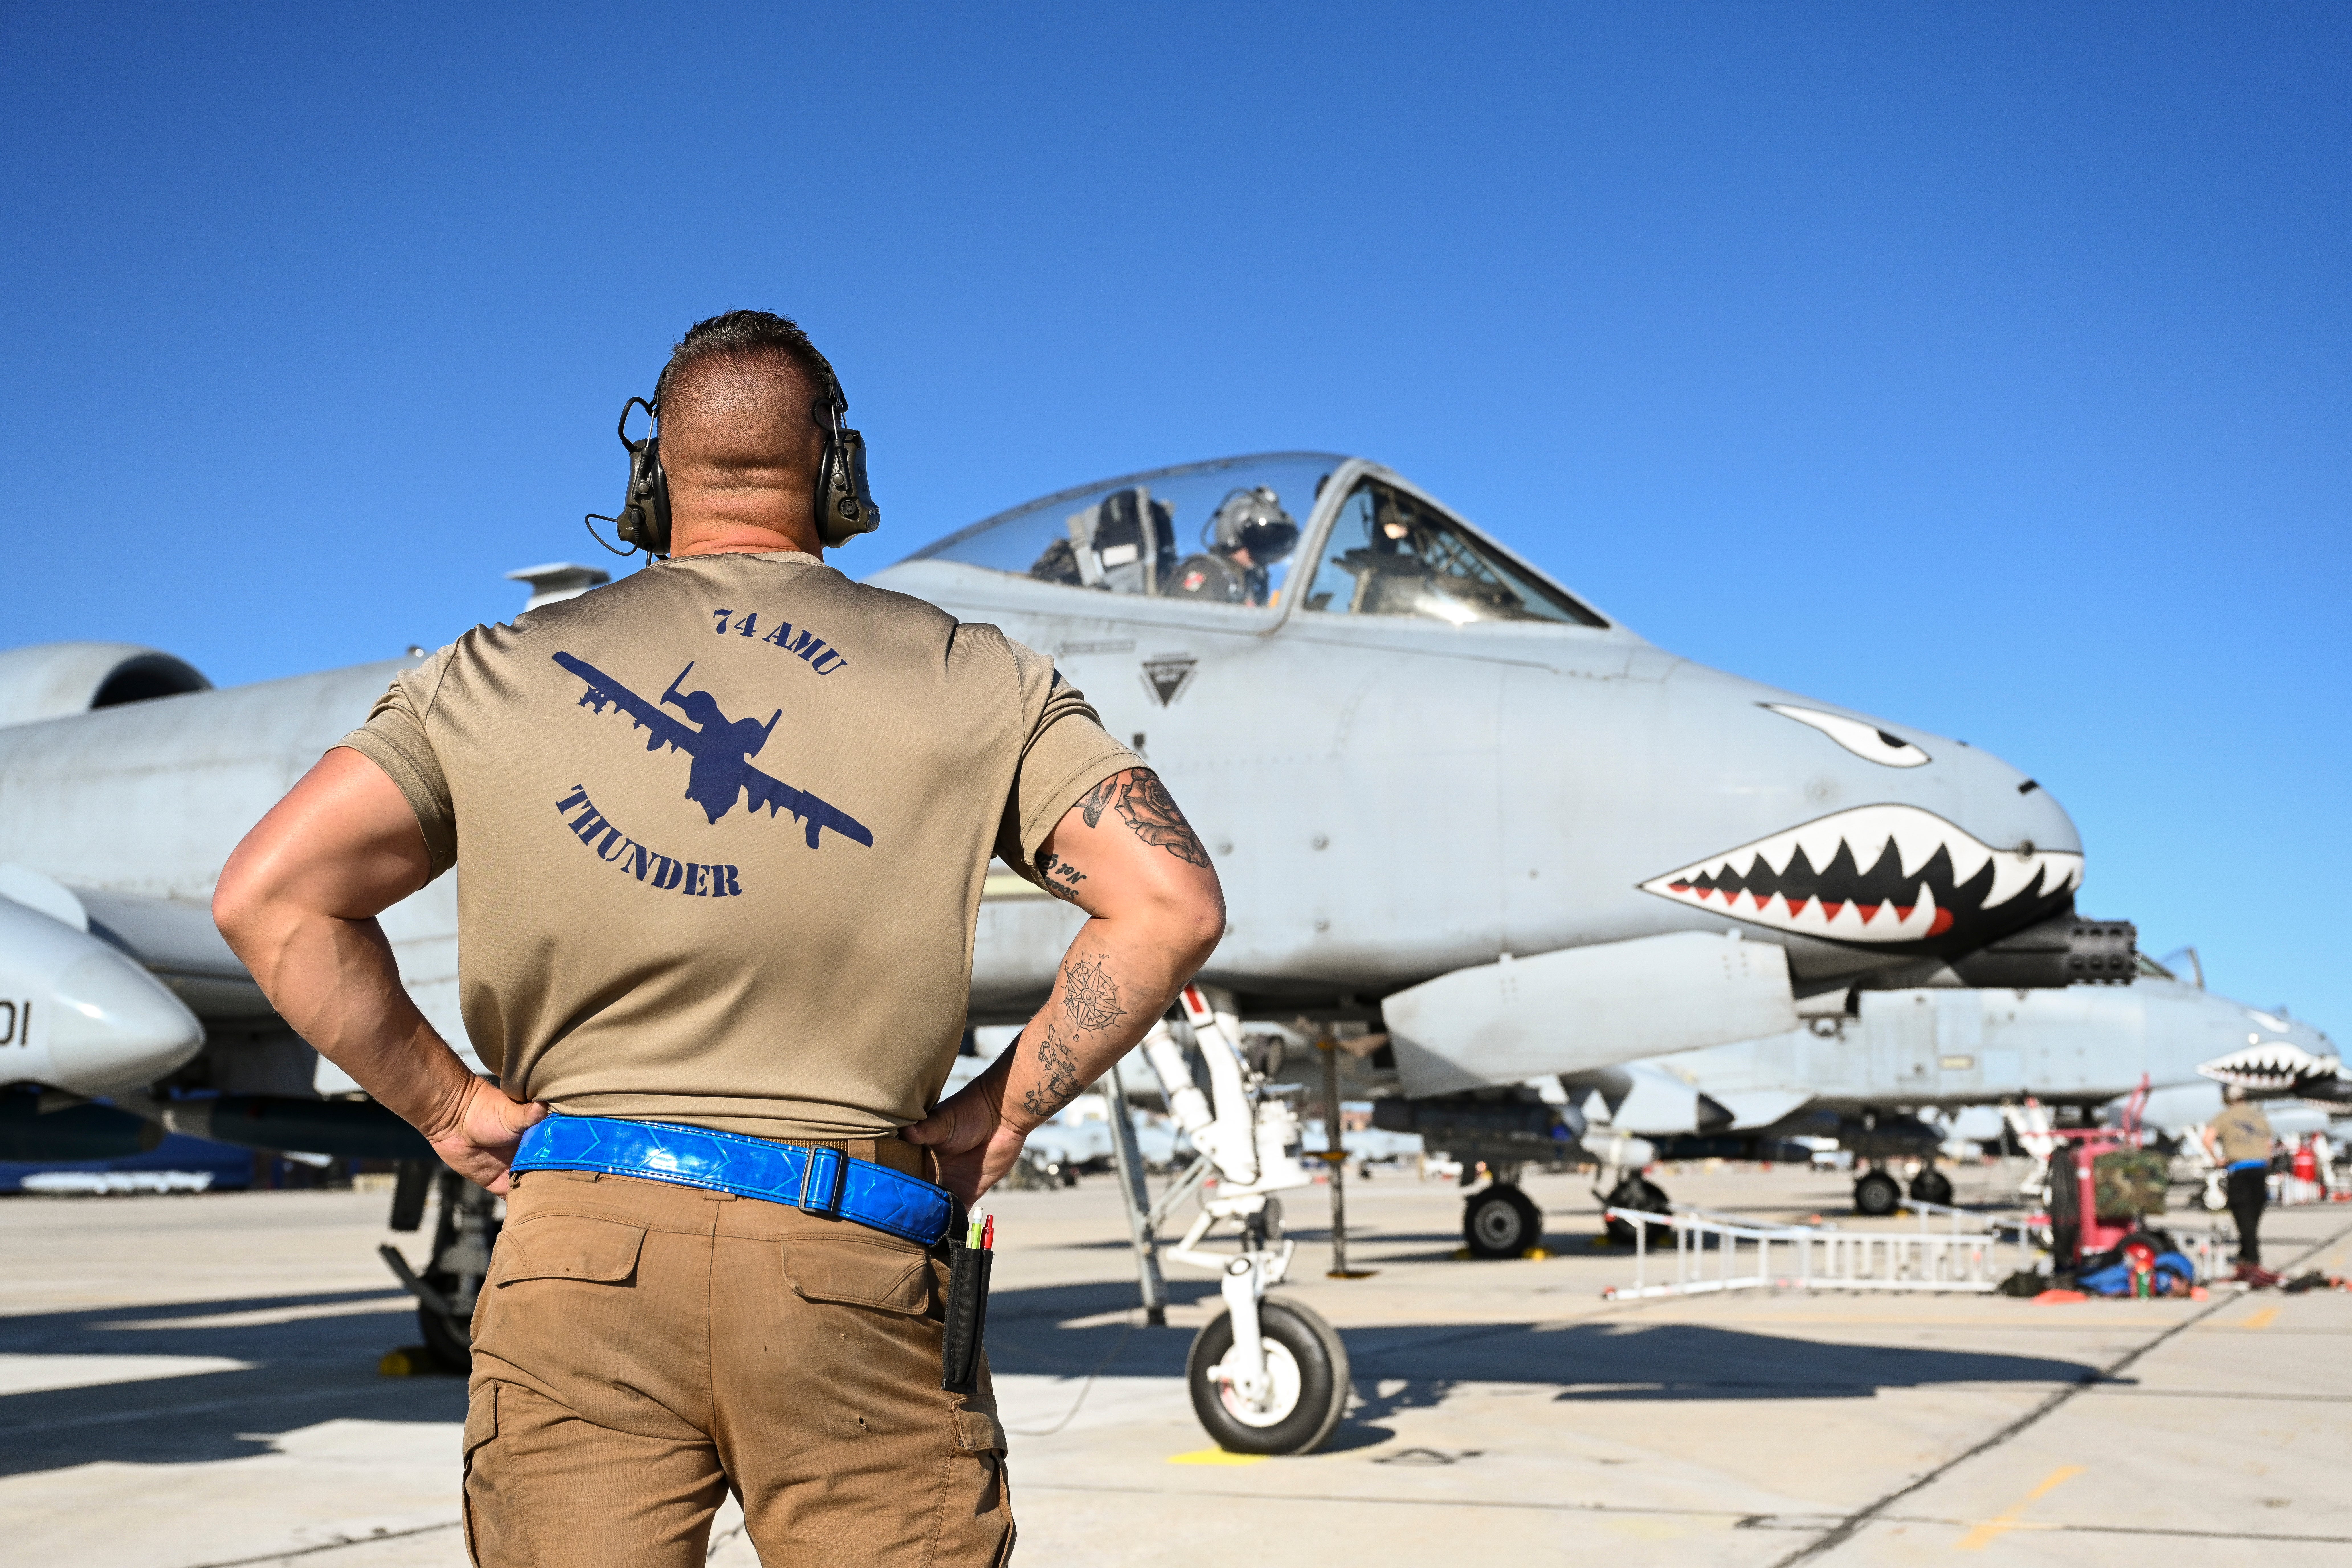 The 124th Fighter Wing hosts Hawgsmoke 2022 at Gowen Field, Boise, ID, Sept. 8, 2022. The 190th Fighter Squadron, having won this aerial warfighter skills competition three times since it’s inception in 2000, is back on their home turf defending the title. (U.S. Air Force photo by Staff Sergeant Joseph R. Morgan)